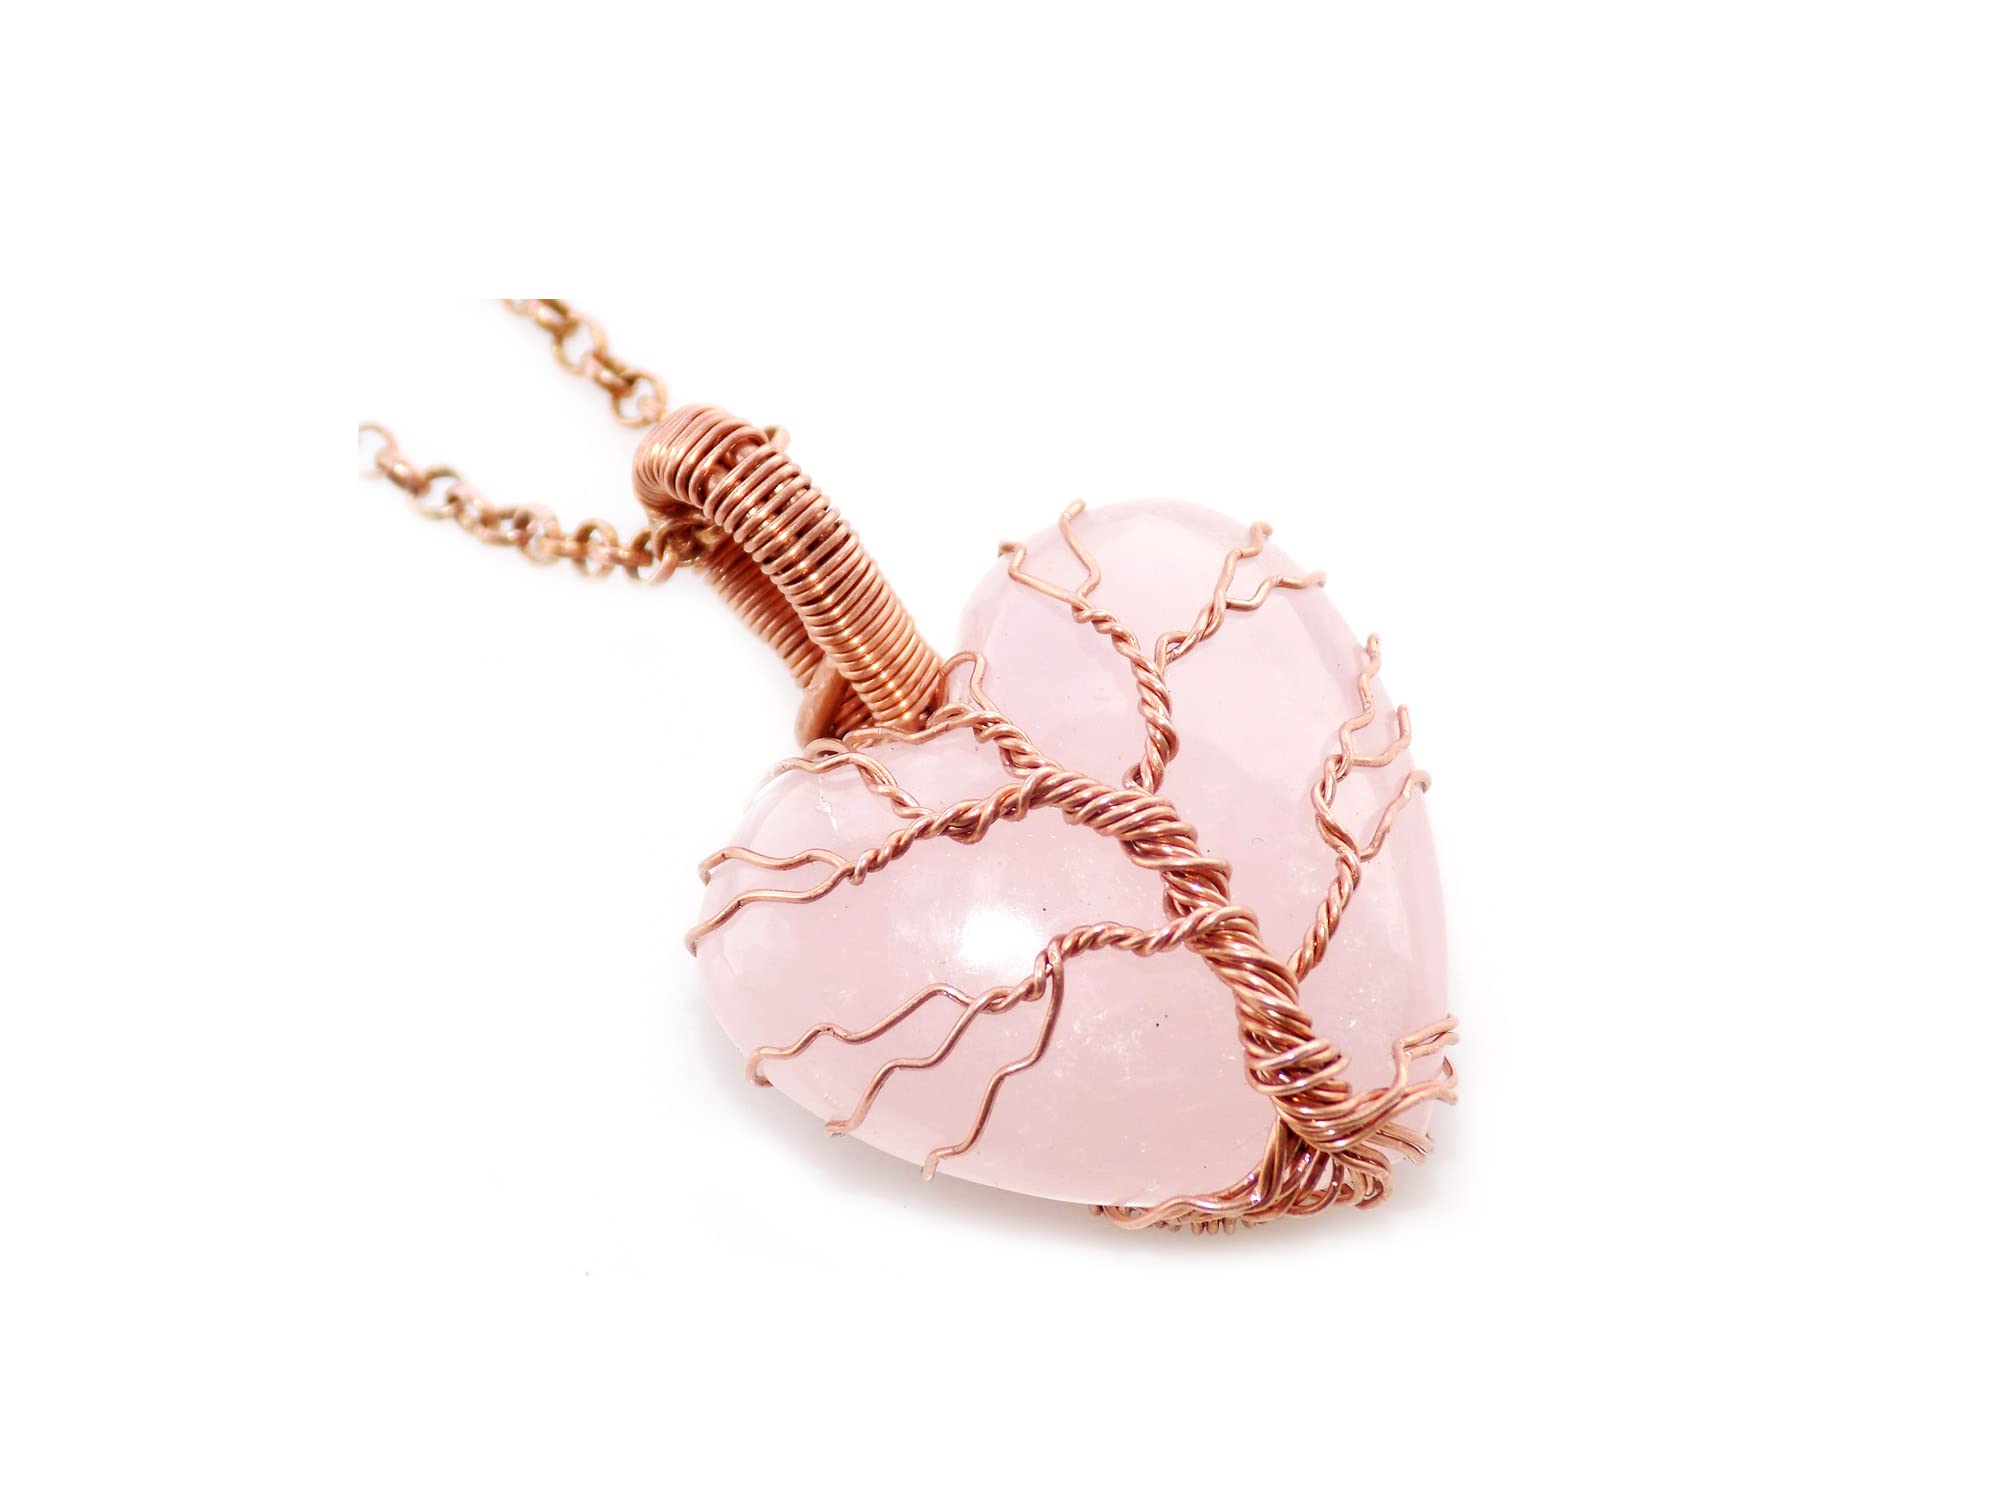 Heart Shape Rose Quartz Gemstone Necklace, Tree of Life Pendant, Copper Wire Jewelry, Lovely Gift, 41x30mm